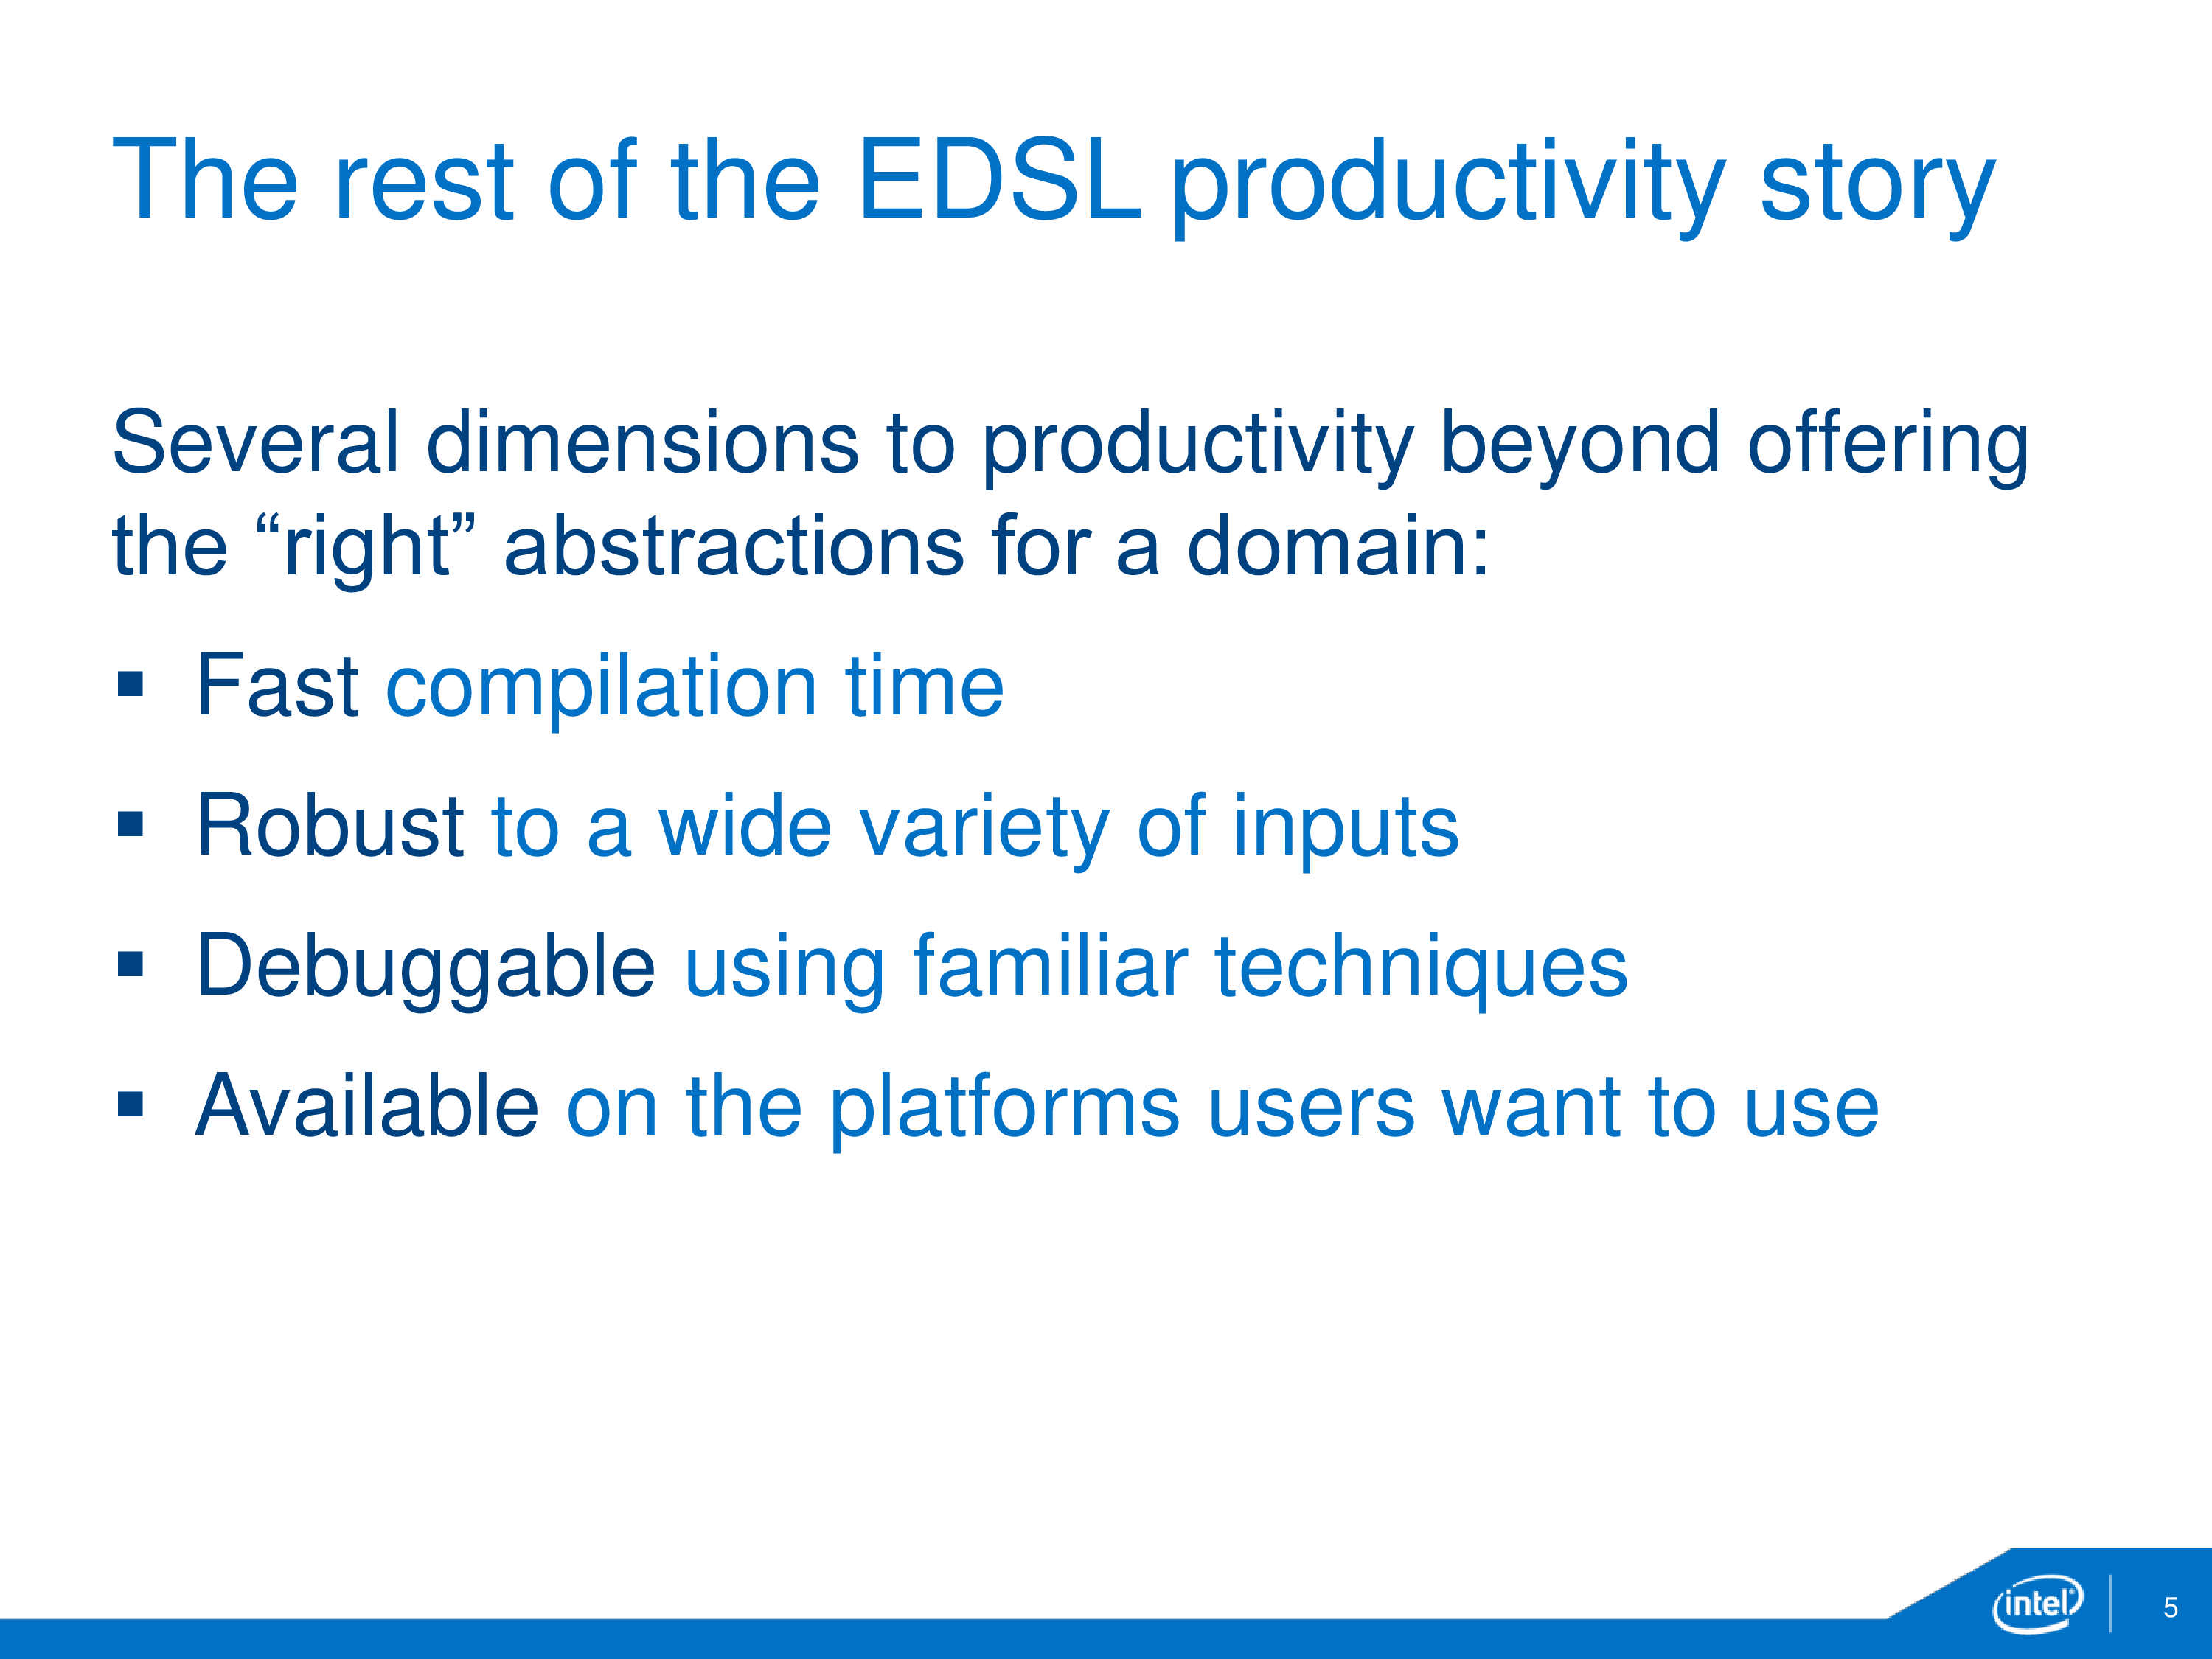 The rest of the EDSL productivity story: Several dimensions to productivity beyond offering the “right” abstractions for a domain. Fast compilation time; robust to a wide variety of inputs; debuggable using familiar techniques; available on the platforms users want to use.